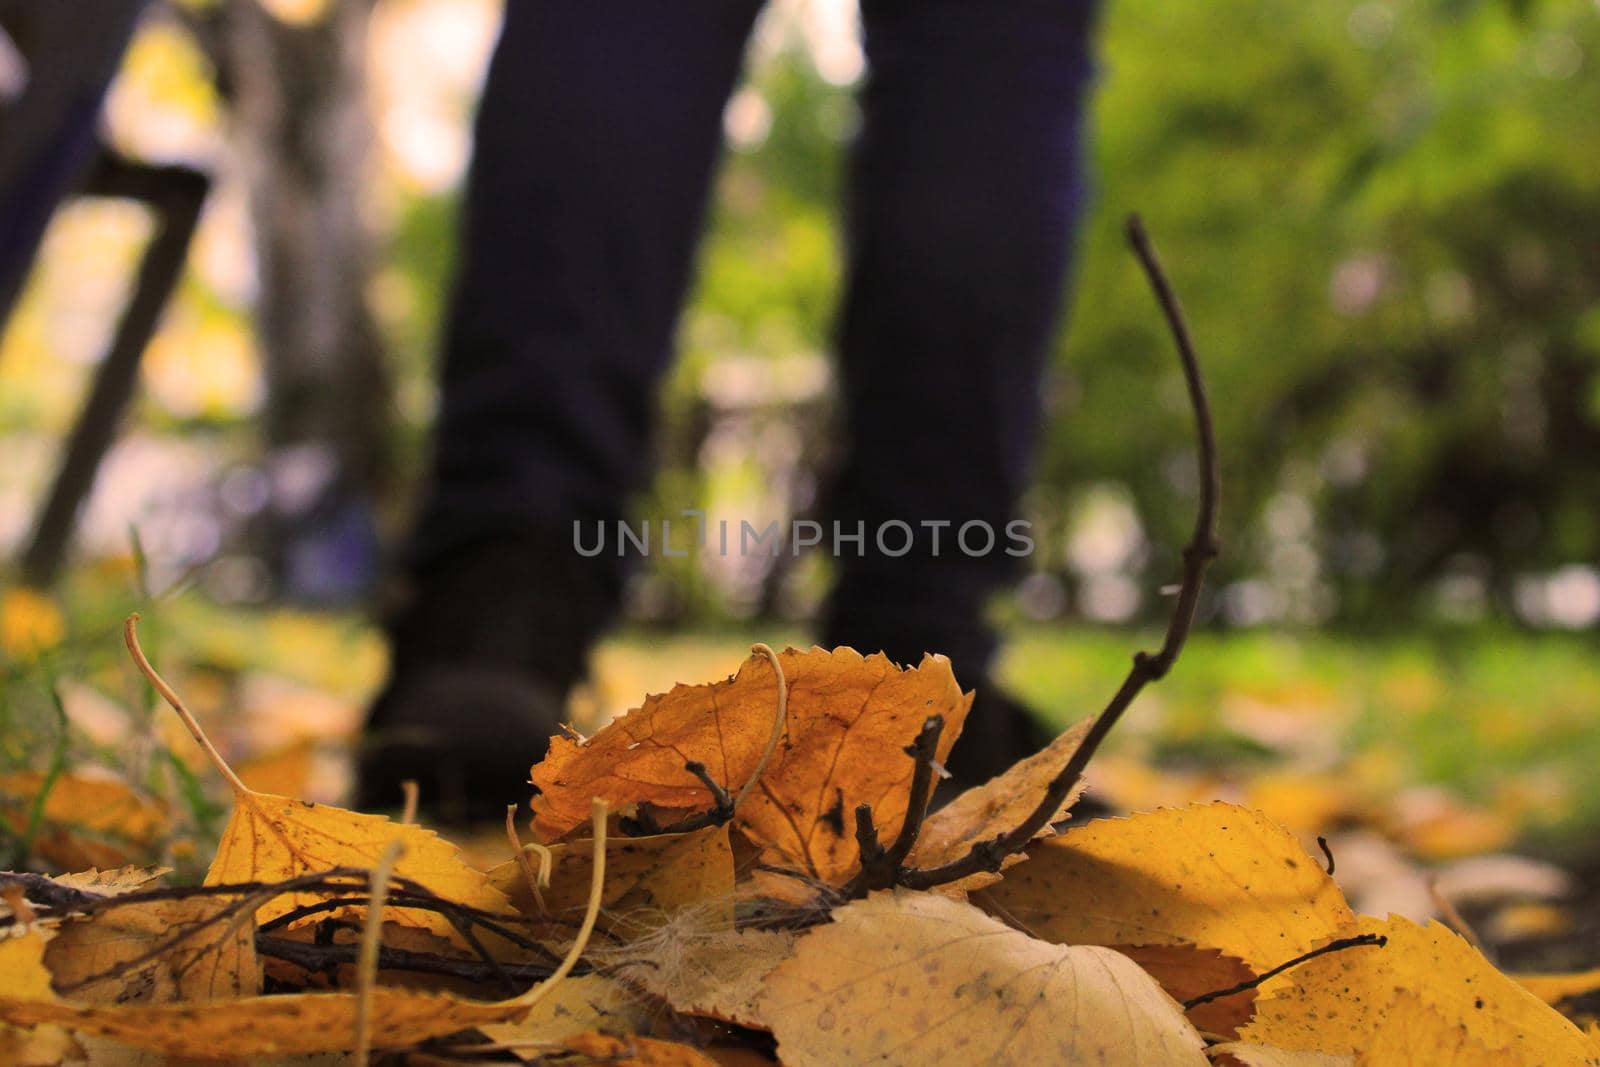 Women's legs in blue jeans and black sneakers against the background of autumn yellow-orange leaves. Blurred background.